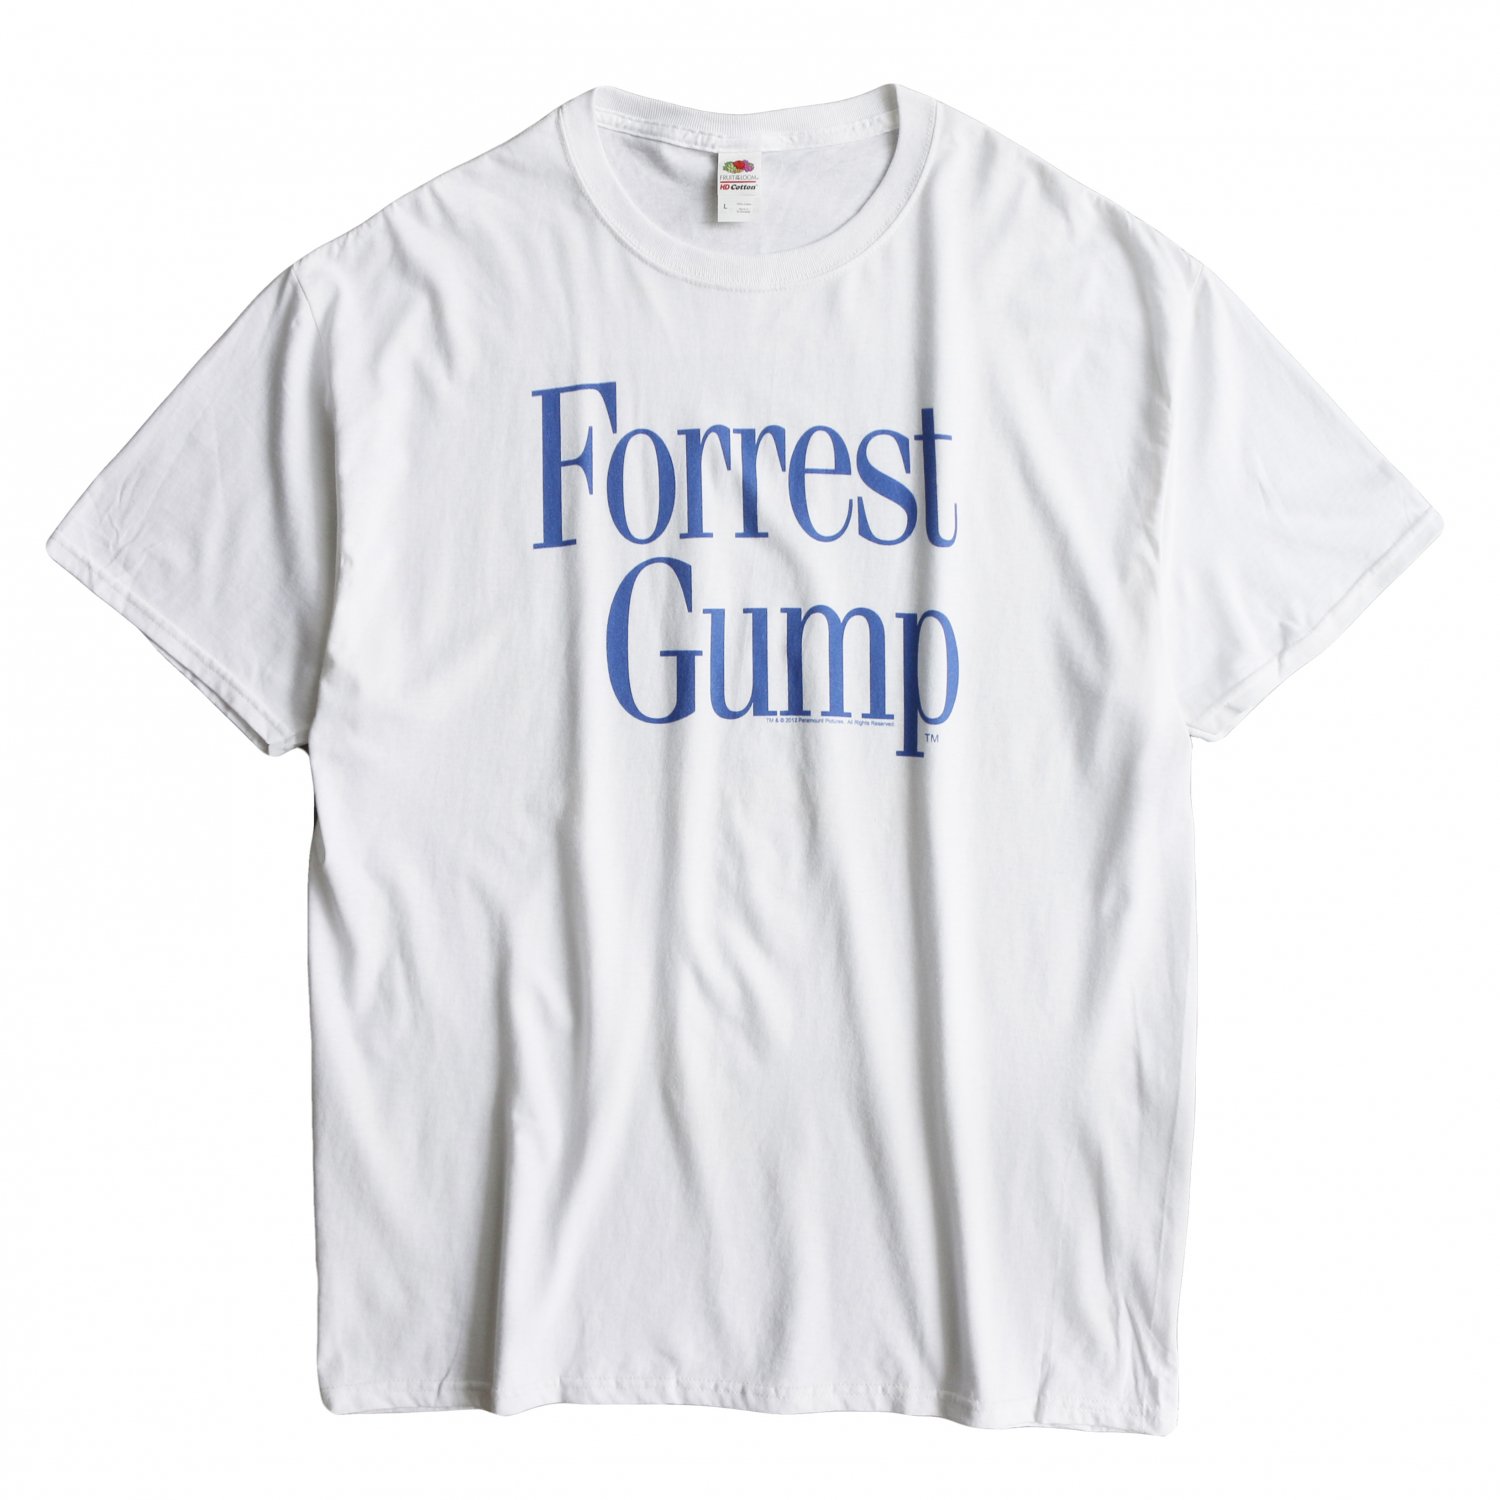 <img class='new_mark_img1' src='https://img.shop-pro.jp/img/new/icons8.gif' style='border:none;display:inline;margin:0px;padding:0px;width:auto;' />Movie Tee / S/S TEE FORREST GUMPLOGO